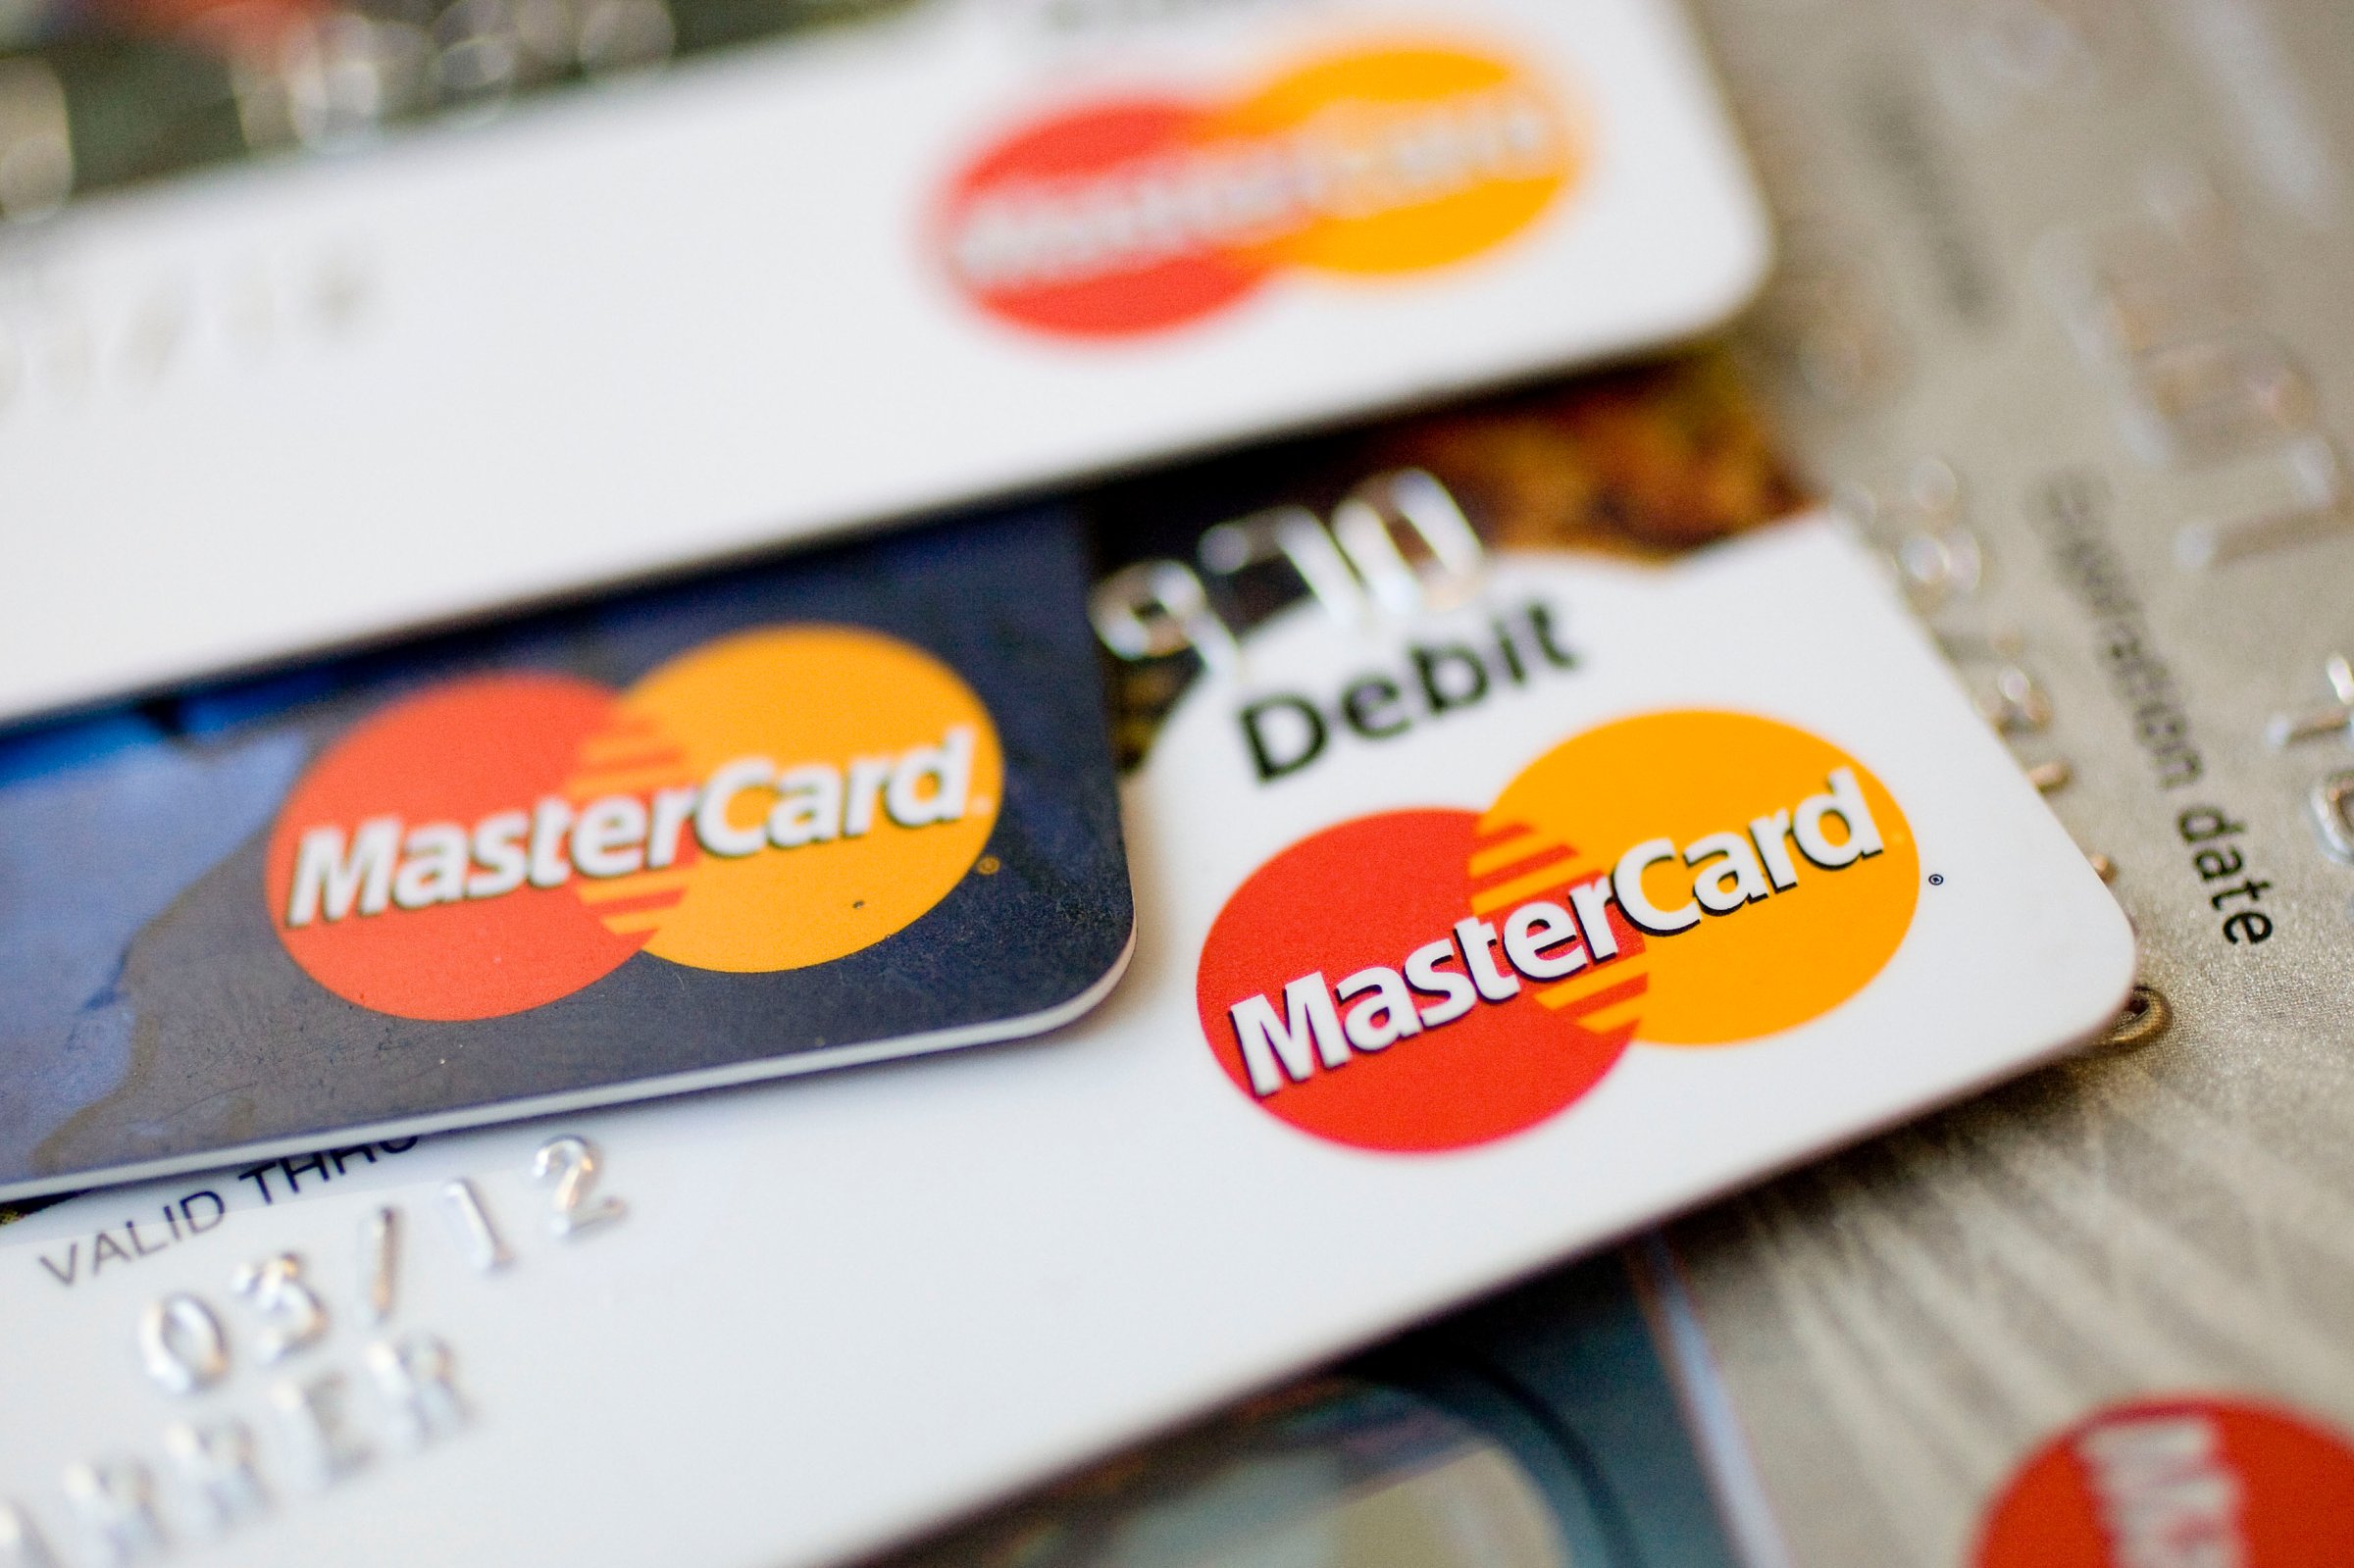 MasterCard logos appear on credit and debit cards arranged for a photograph in New York, U.S., on Thursday, July 30, 2009.